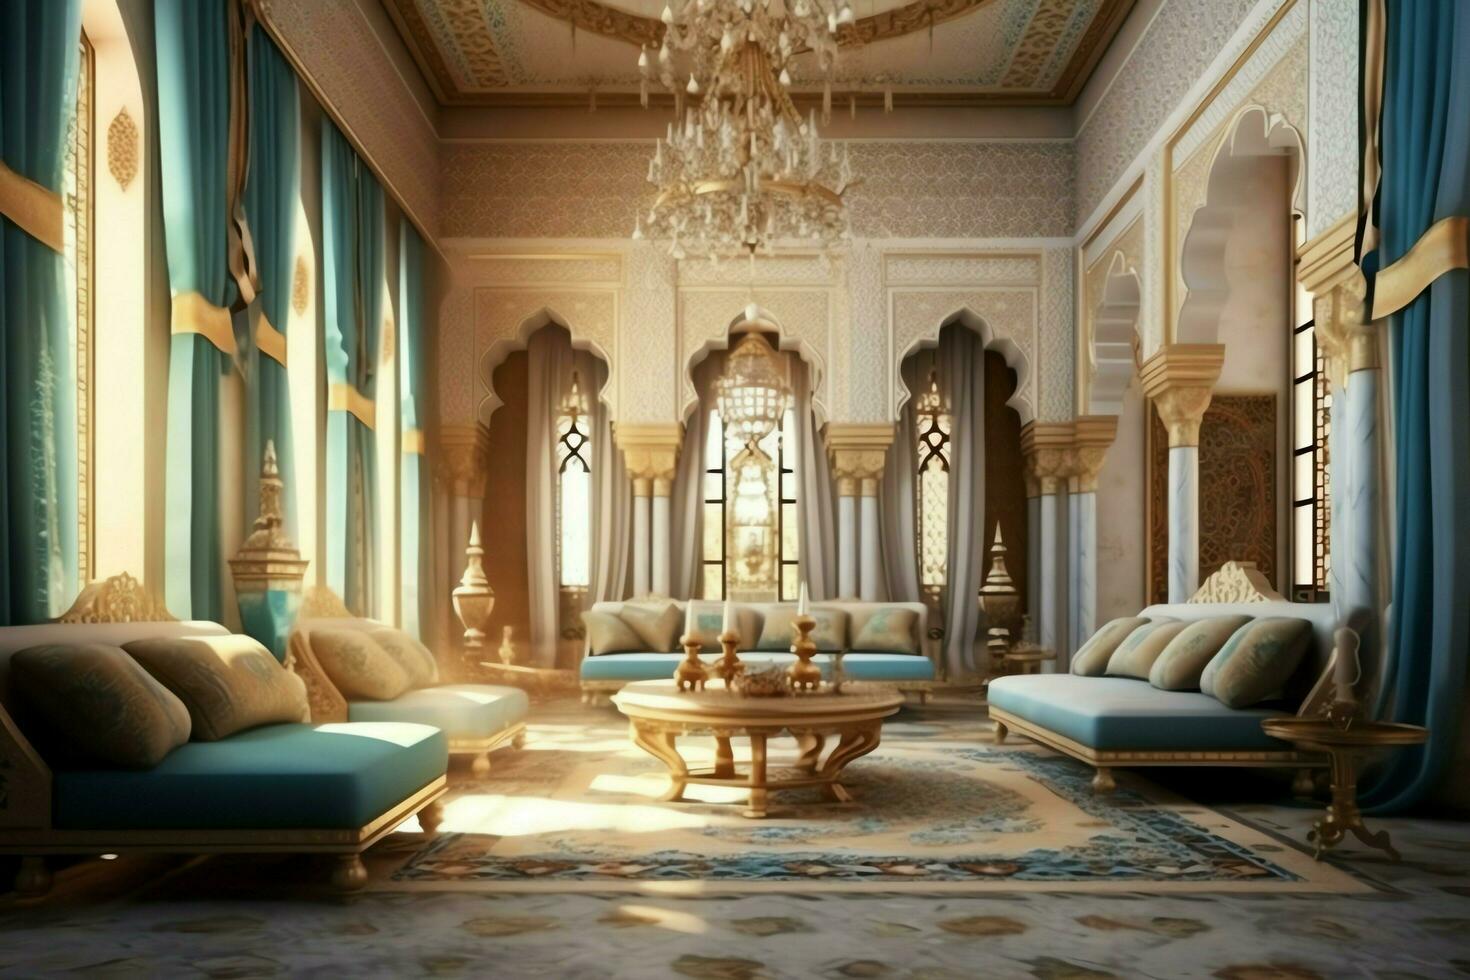 Very luxurious room and large with walls decorated with moroccan mosaic. Room in traditional islamic concept by AI Generated photo